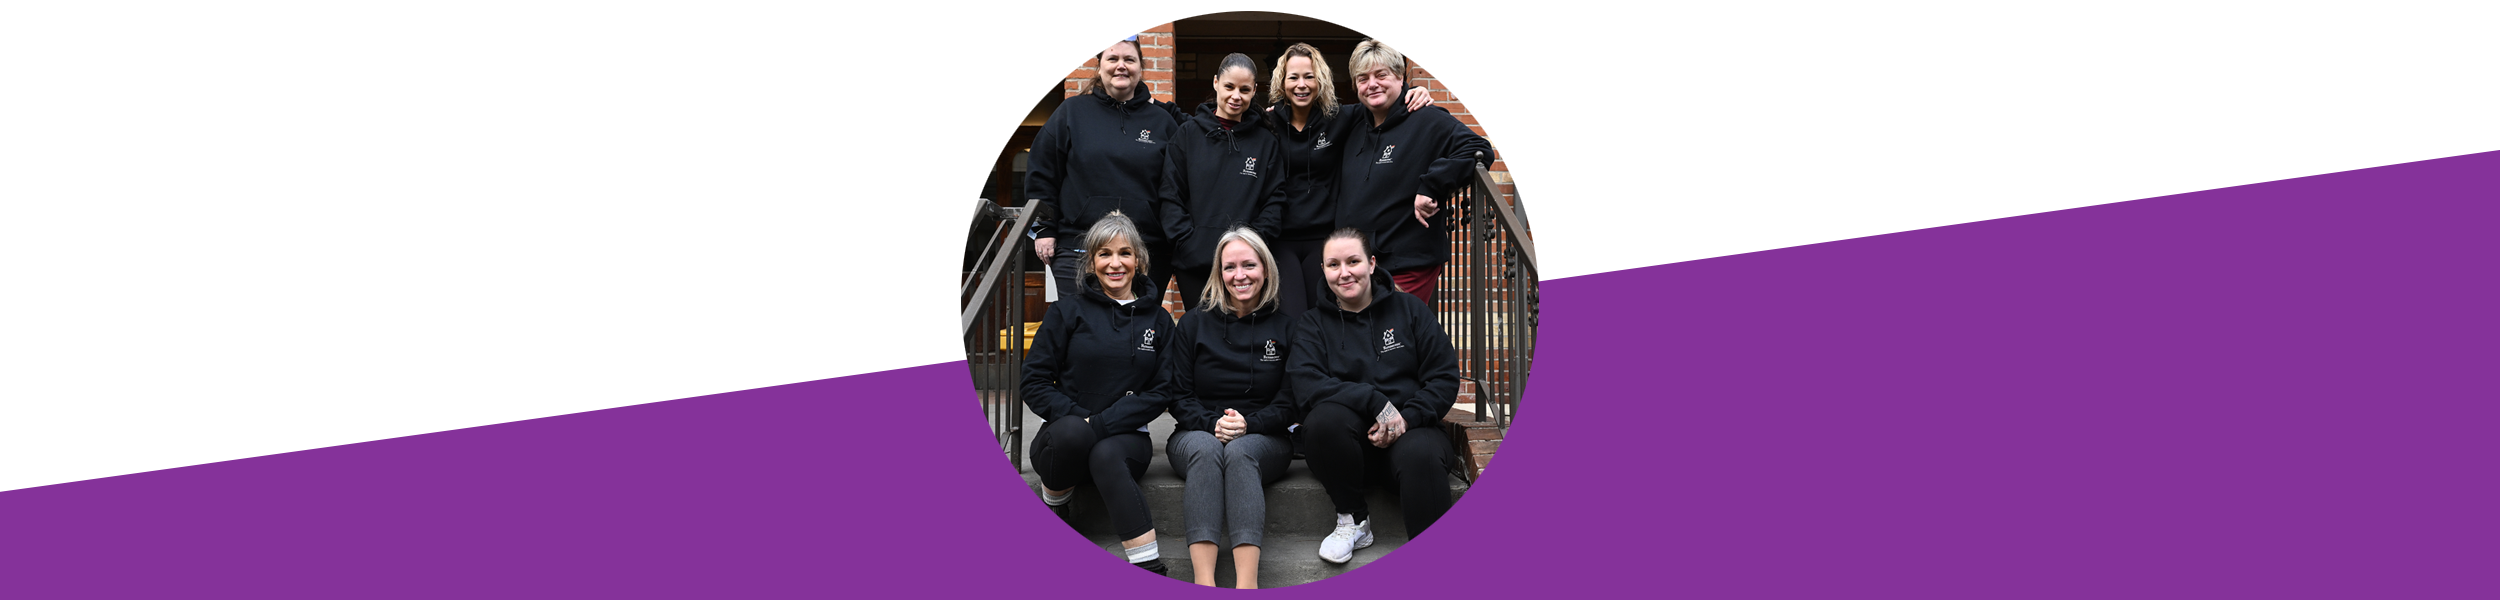 A round photographic style image of seven people all wearing our Renascent branded hoodies.